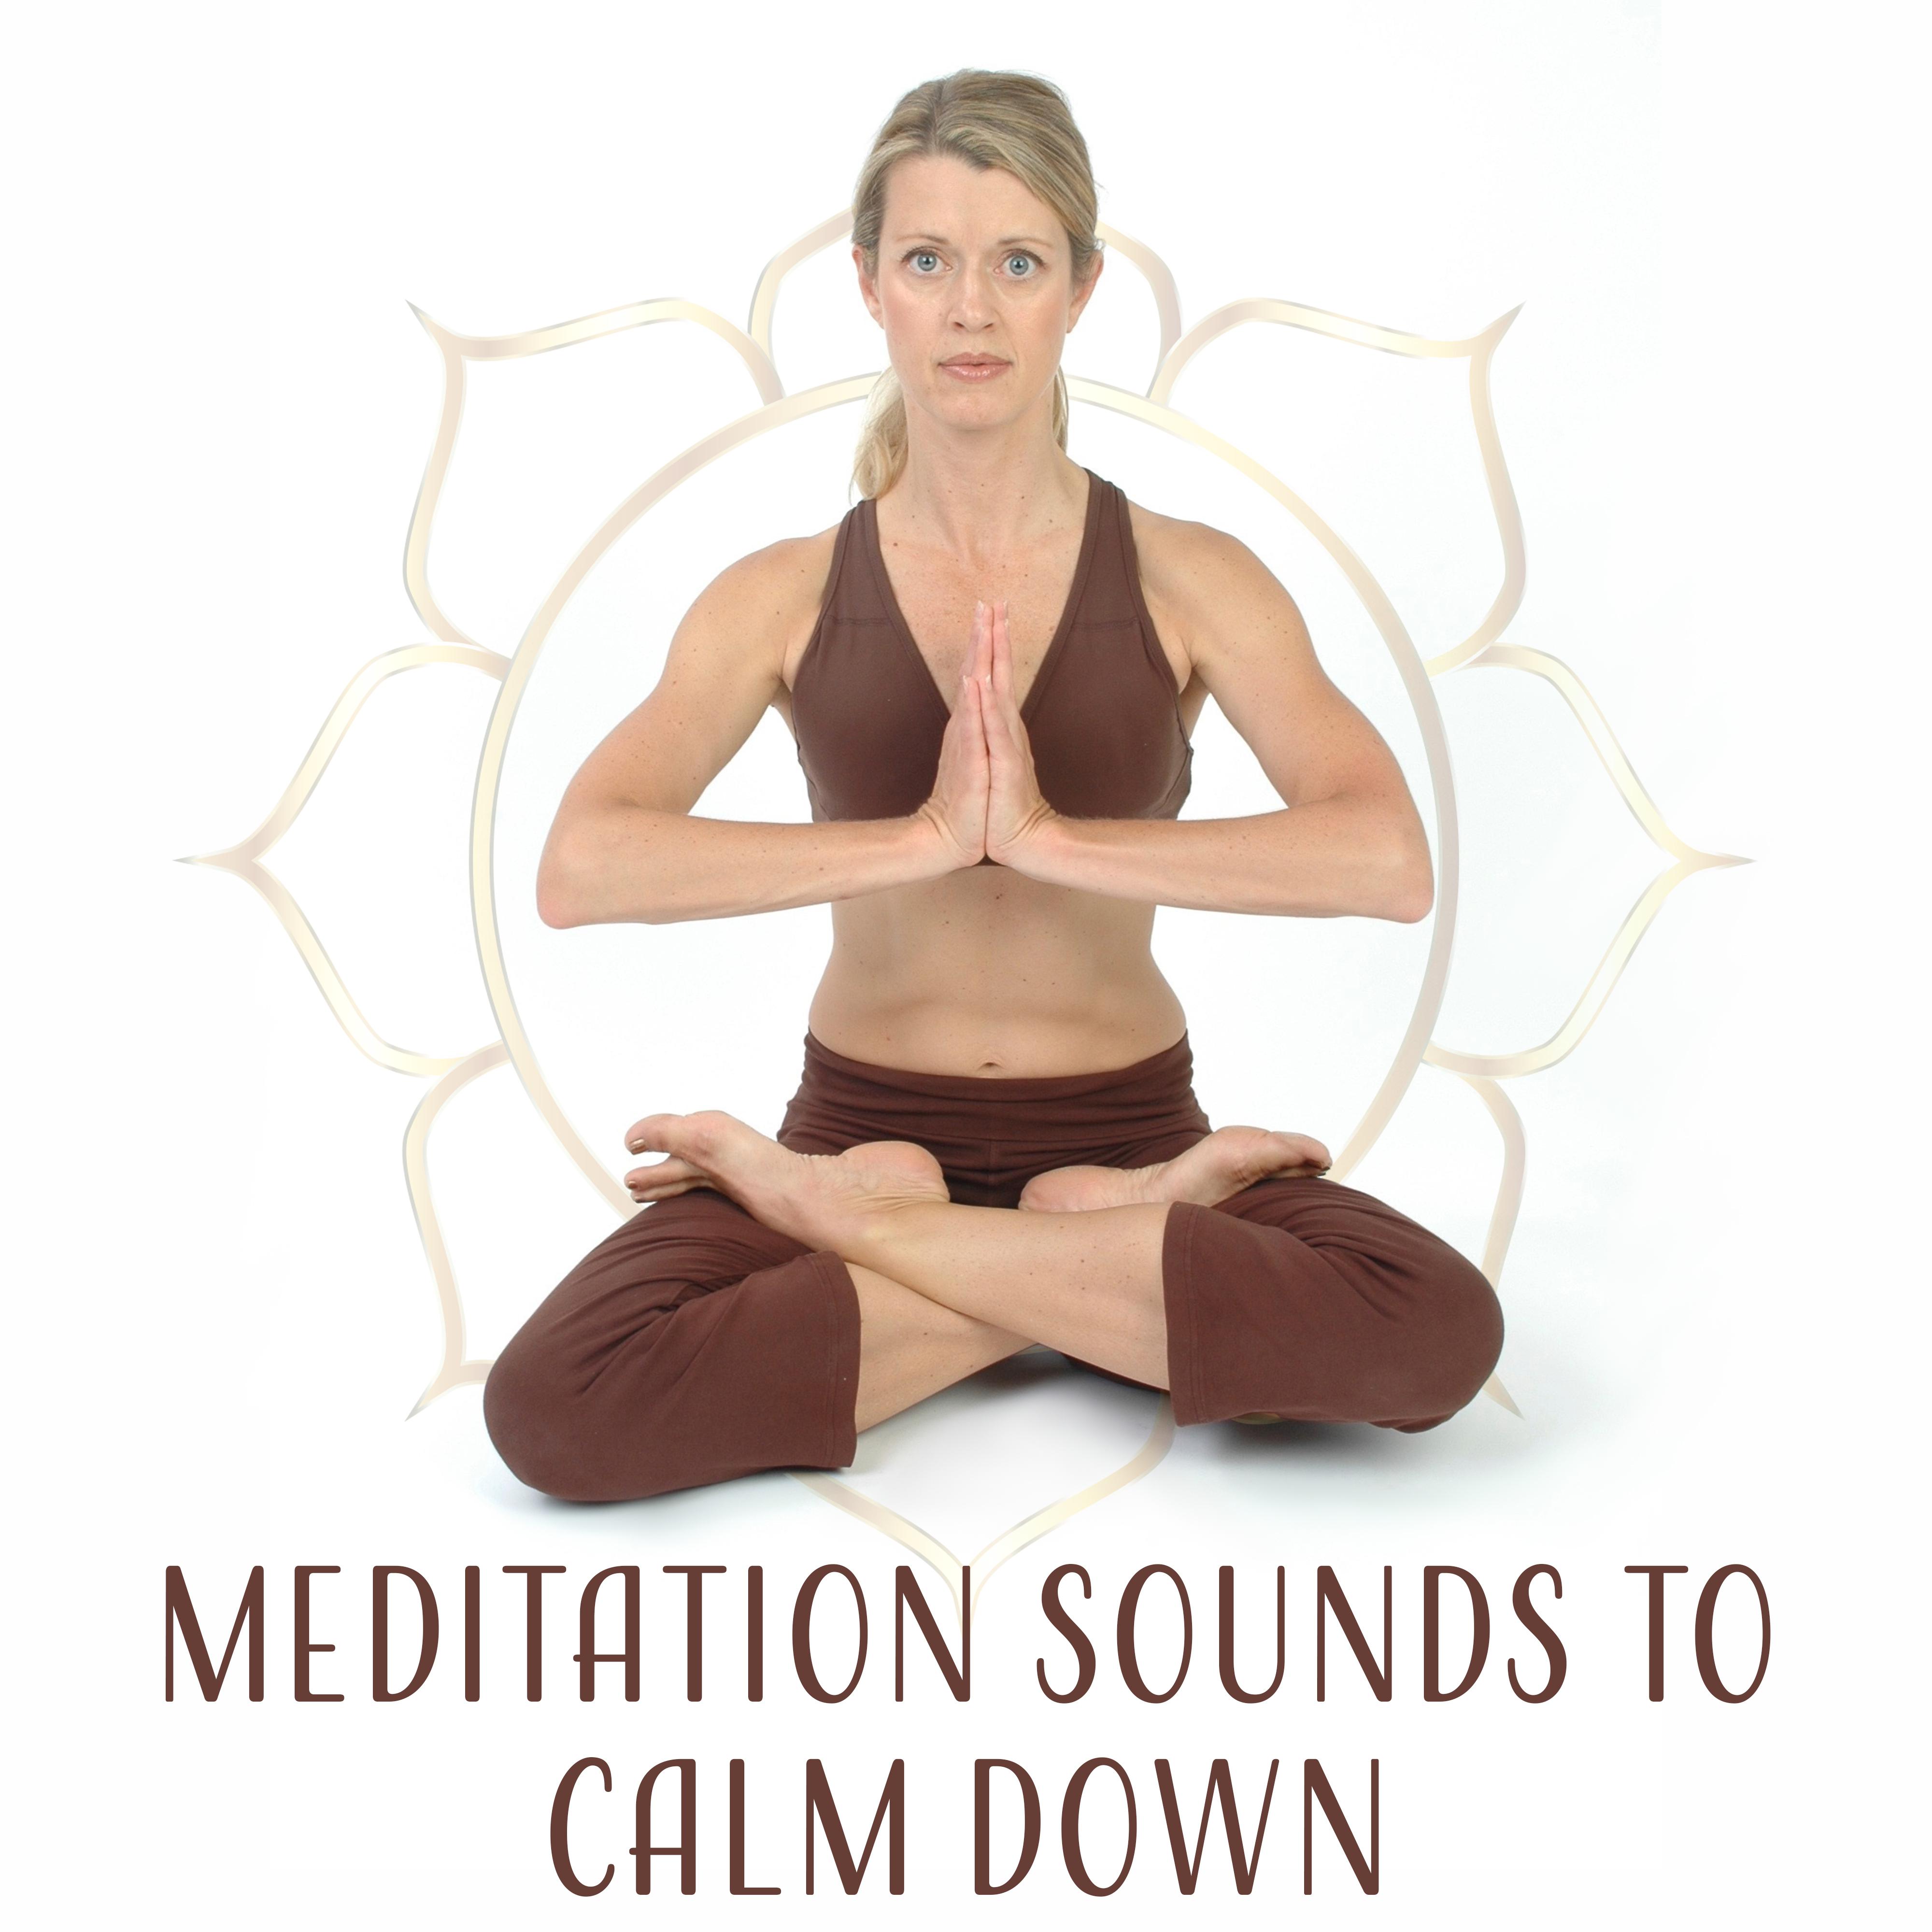 Meditation Sounds to Calm Down  Easy Listening, New Age Relaxation, Music to Rest, Stress Relief